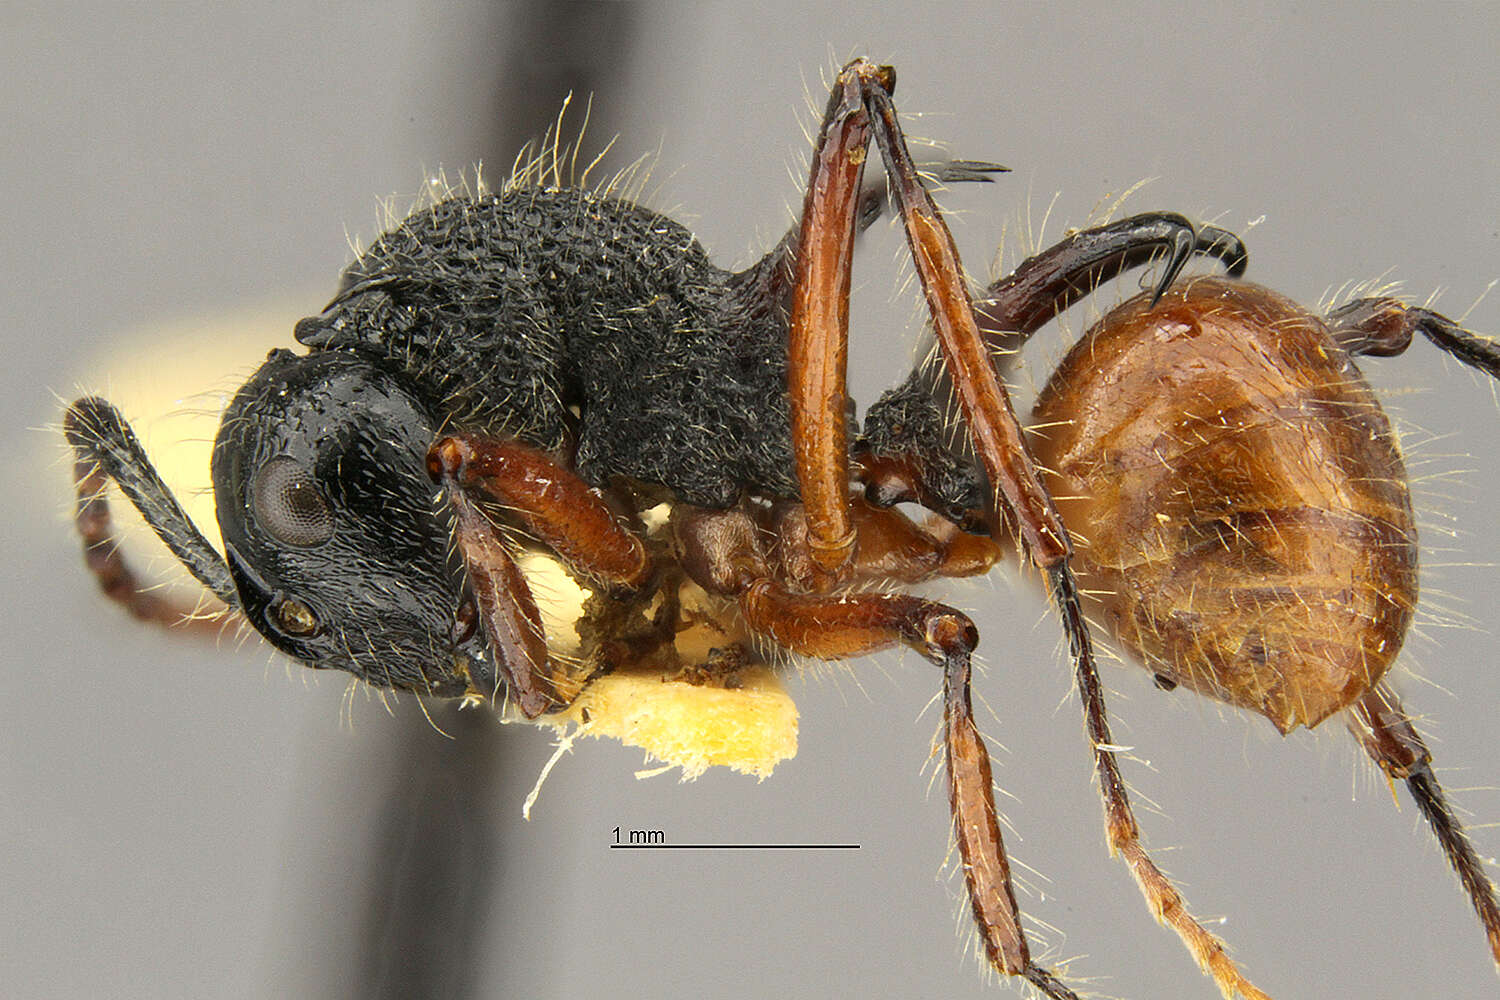 Image of Polyrhachis